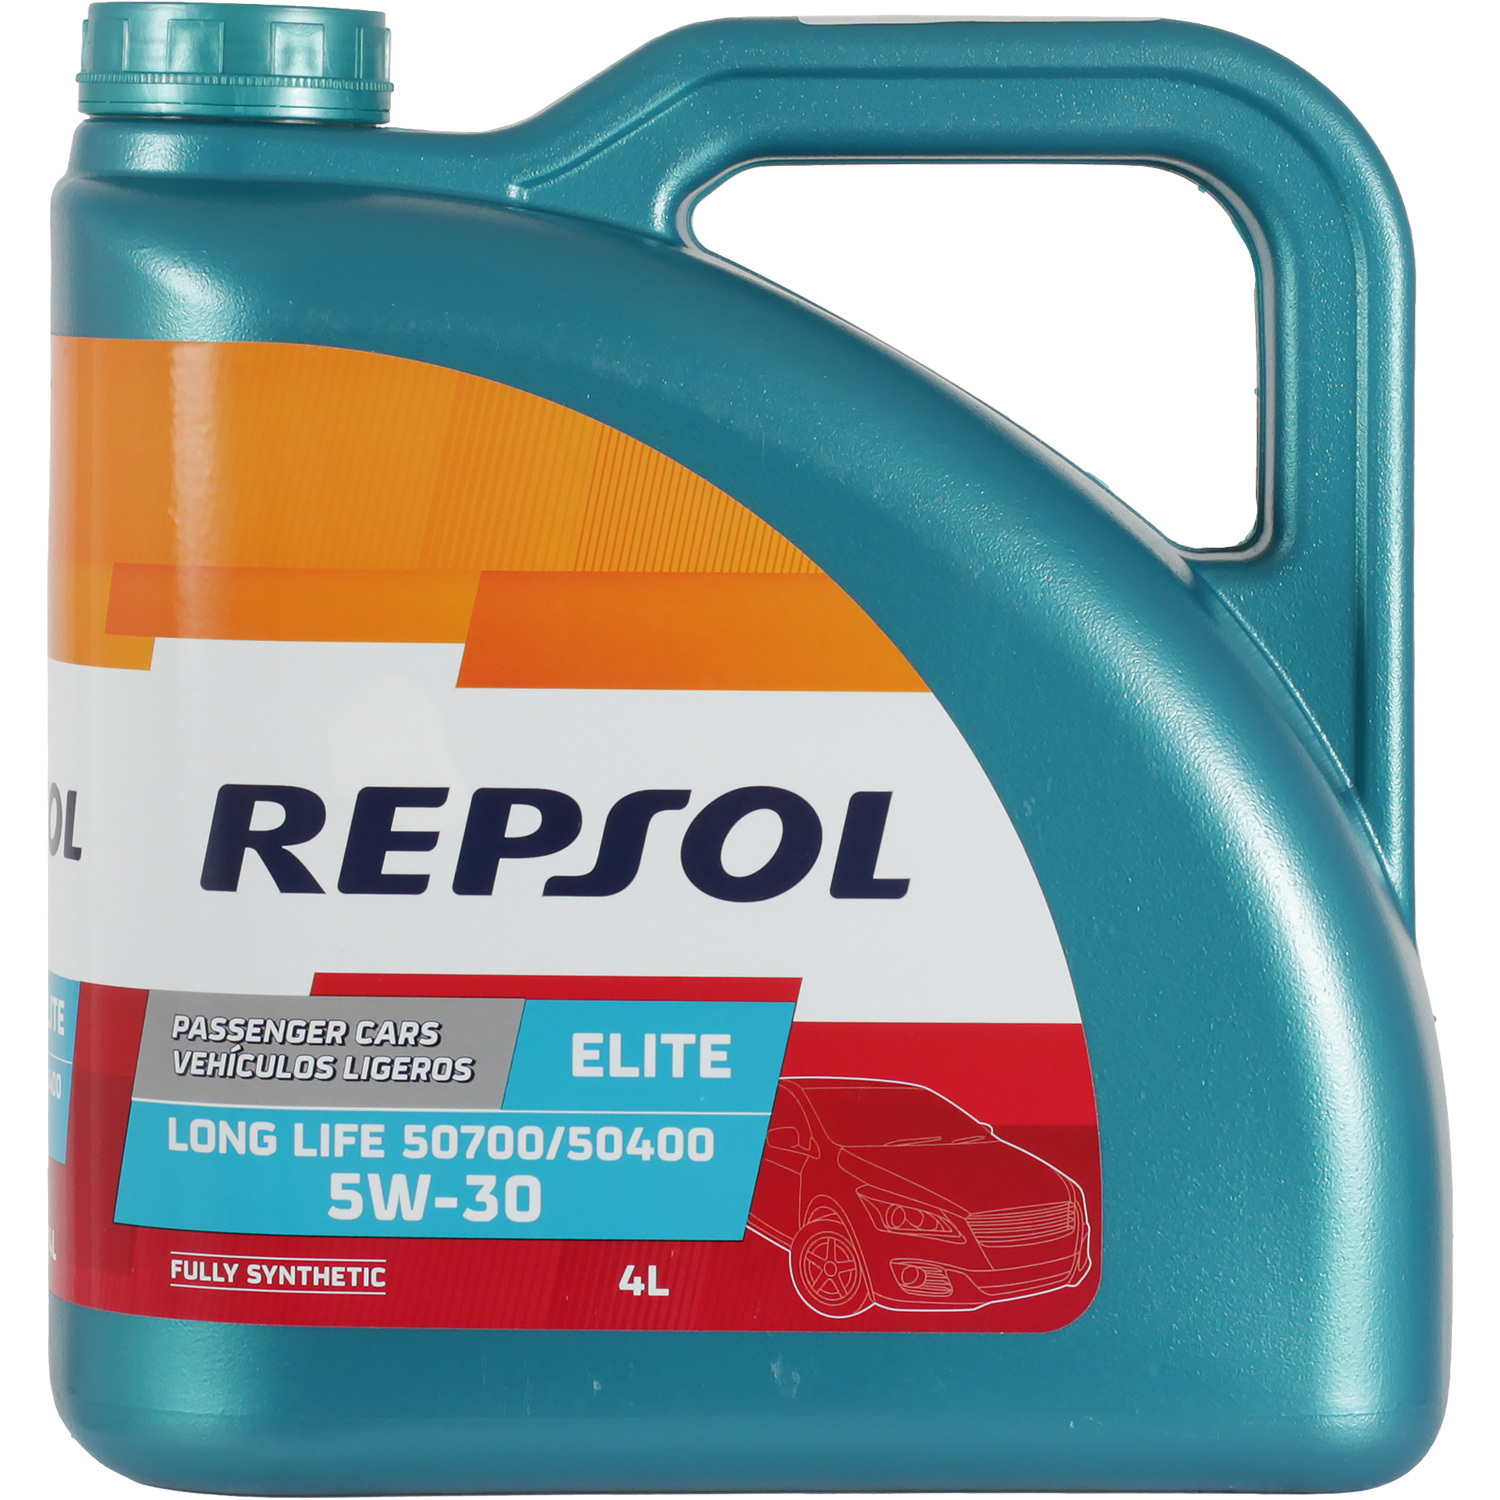 Repsol Масло моторное Repsol ELITE LONG LIFE 50700/50400 5W-30 4л моторное масло motul specific vw 50400 50700 5w 30 1 л 106374